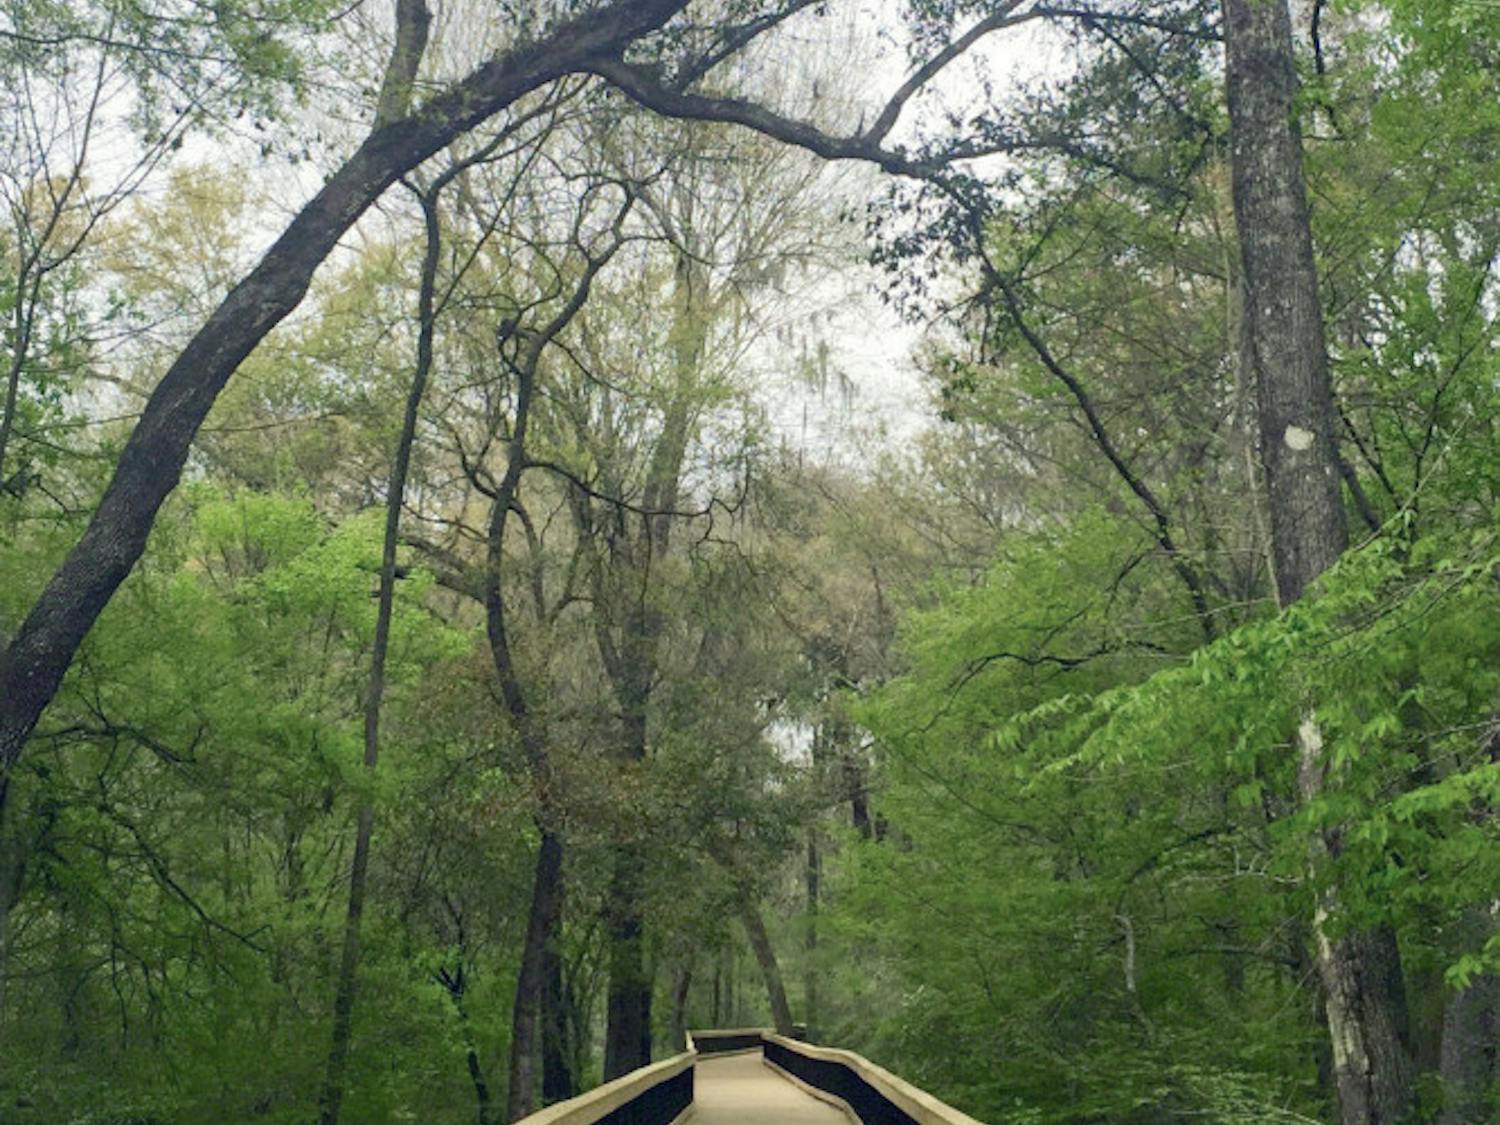 Pictured is the renovated Loblolly Woods Nature Park boardwalk on Eighth Avenue. The quarter-mile-long boardwalk is now open to the public after being closed for almost a year for repairs to holes and the side rails.